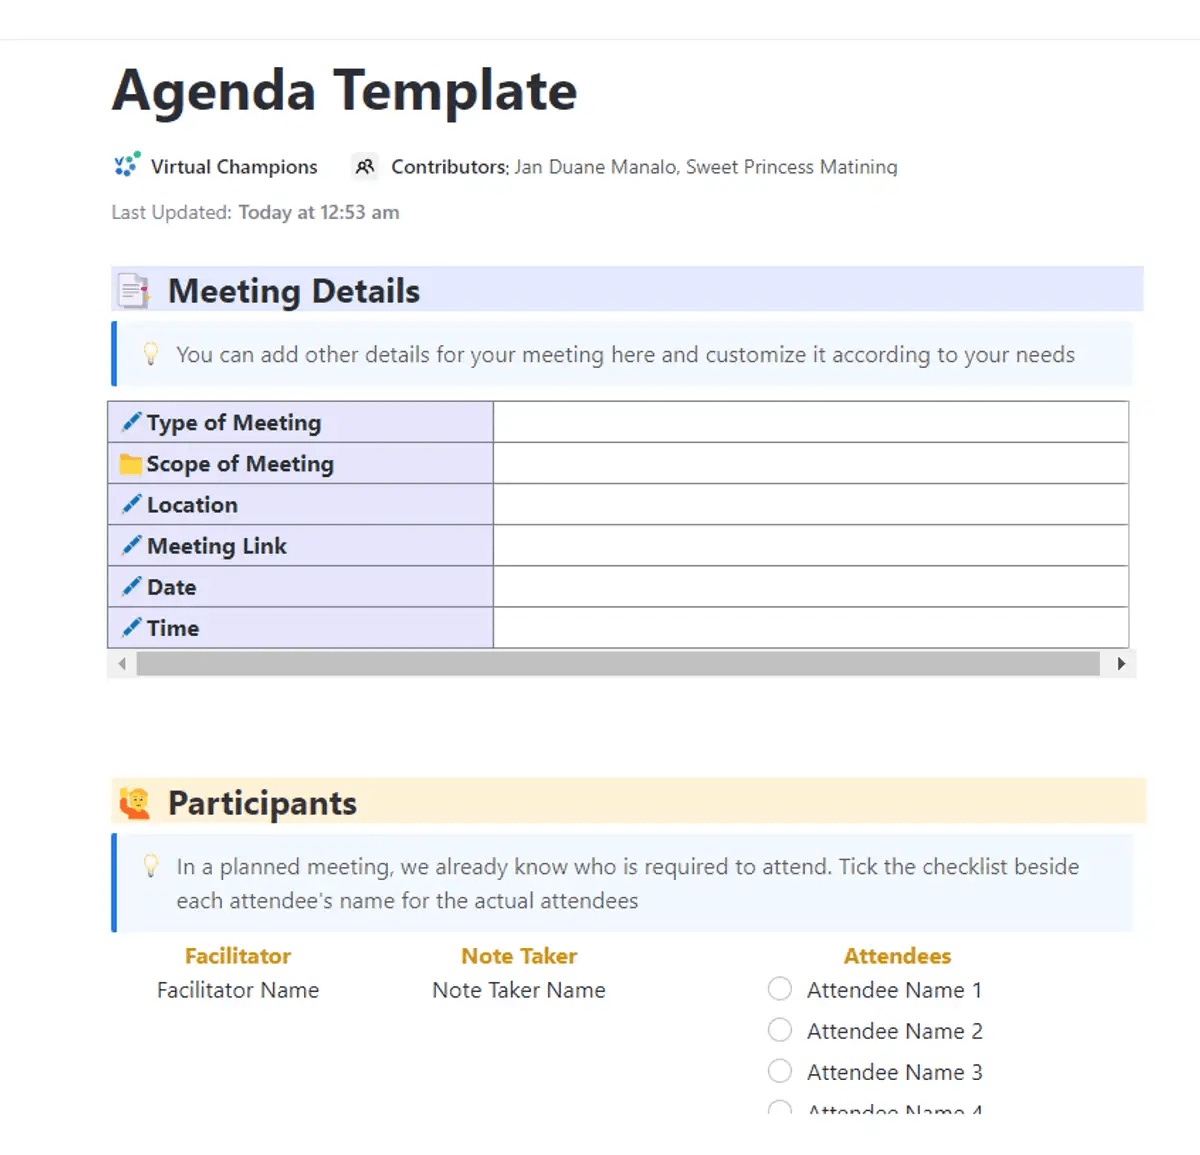 Create meetings with organized agendas and tasks with the ClickUp Agenda Template 